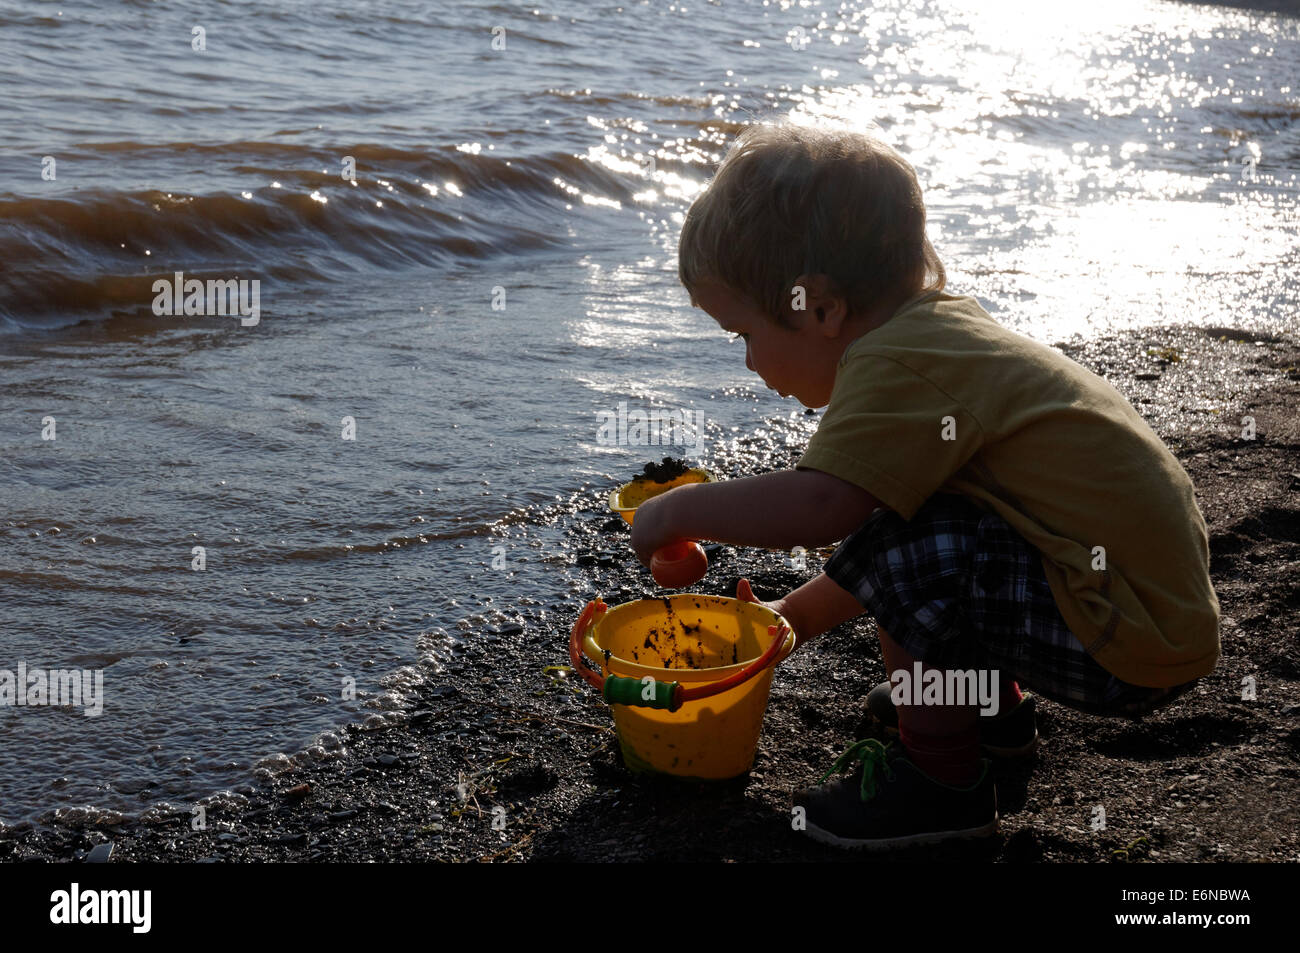 A young boy playing with a bucket and spade on the beach Plage Jacques Cartier, Quebec on the St Lawrence shoreline Stock Photo